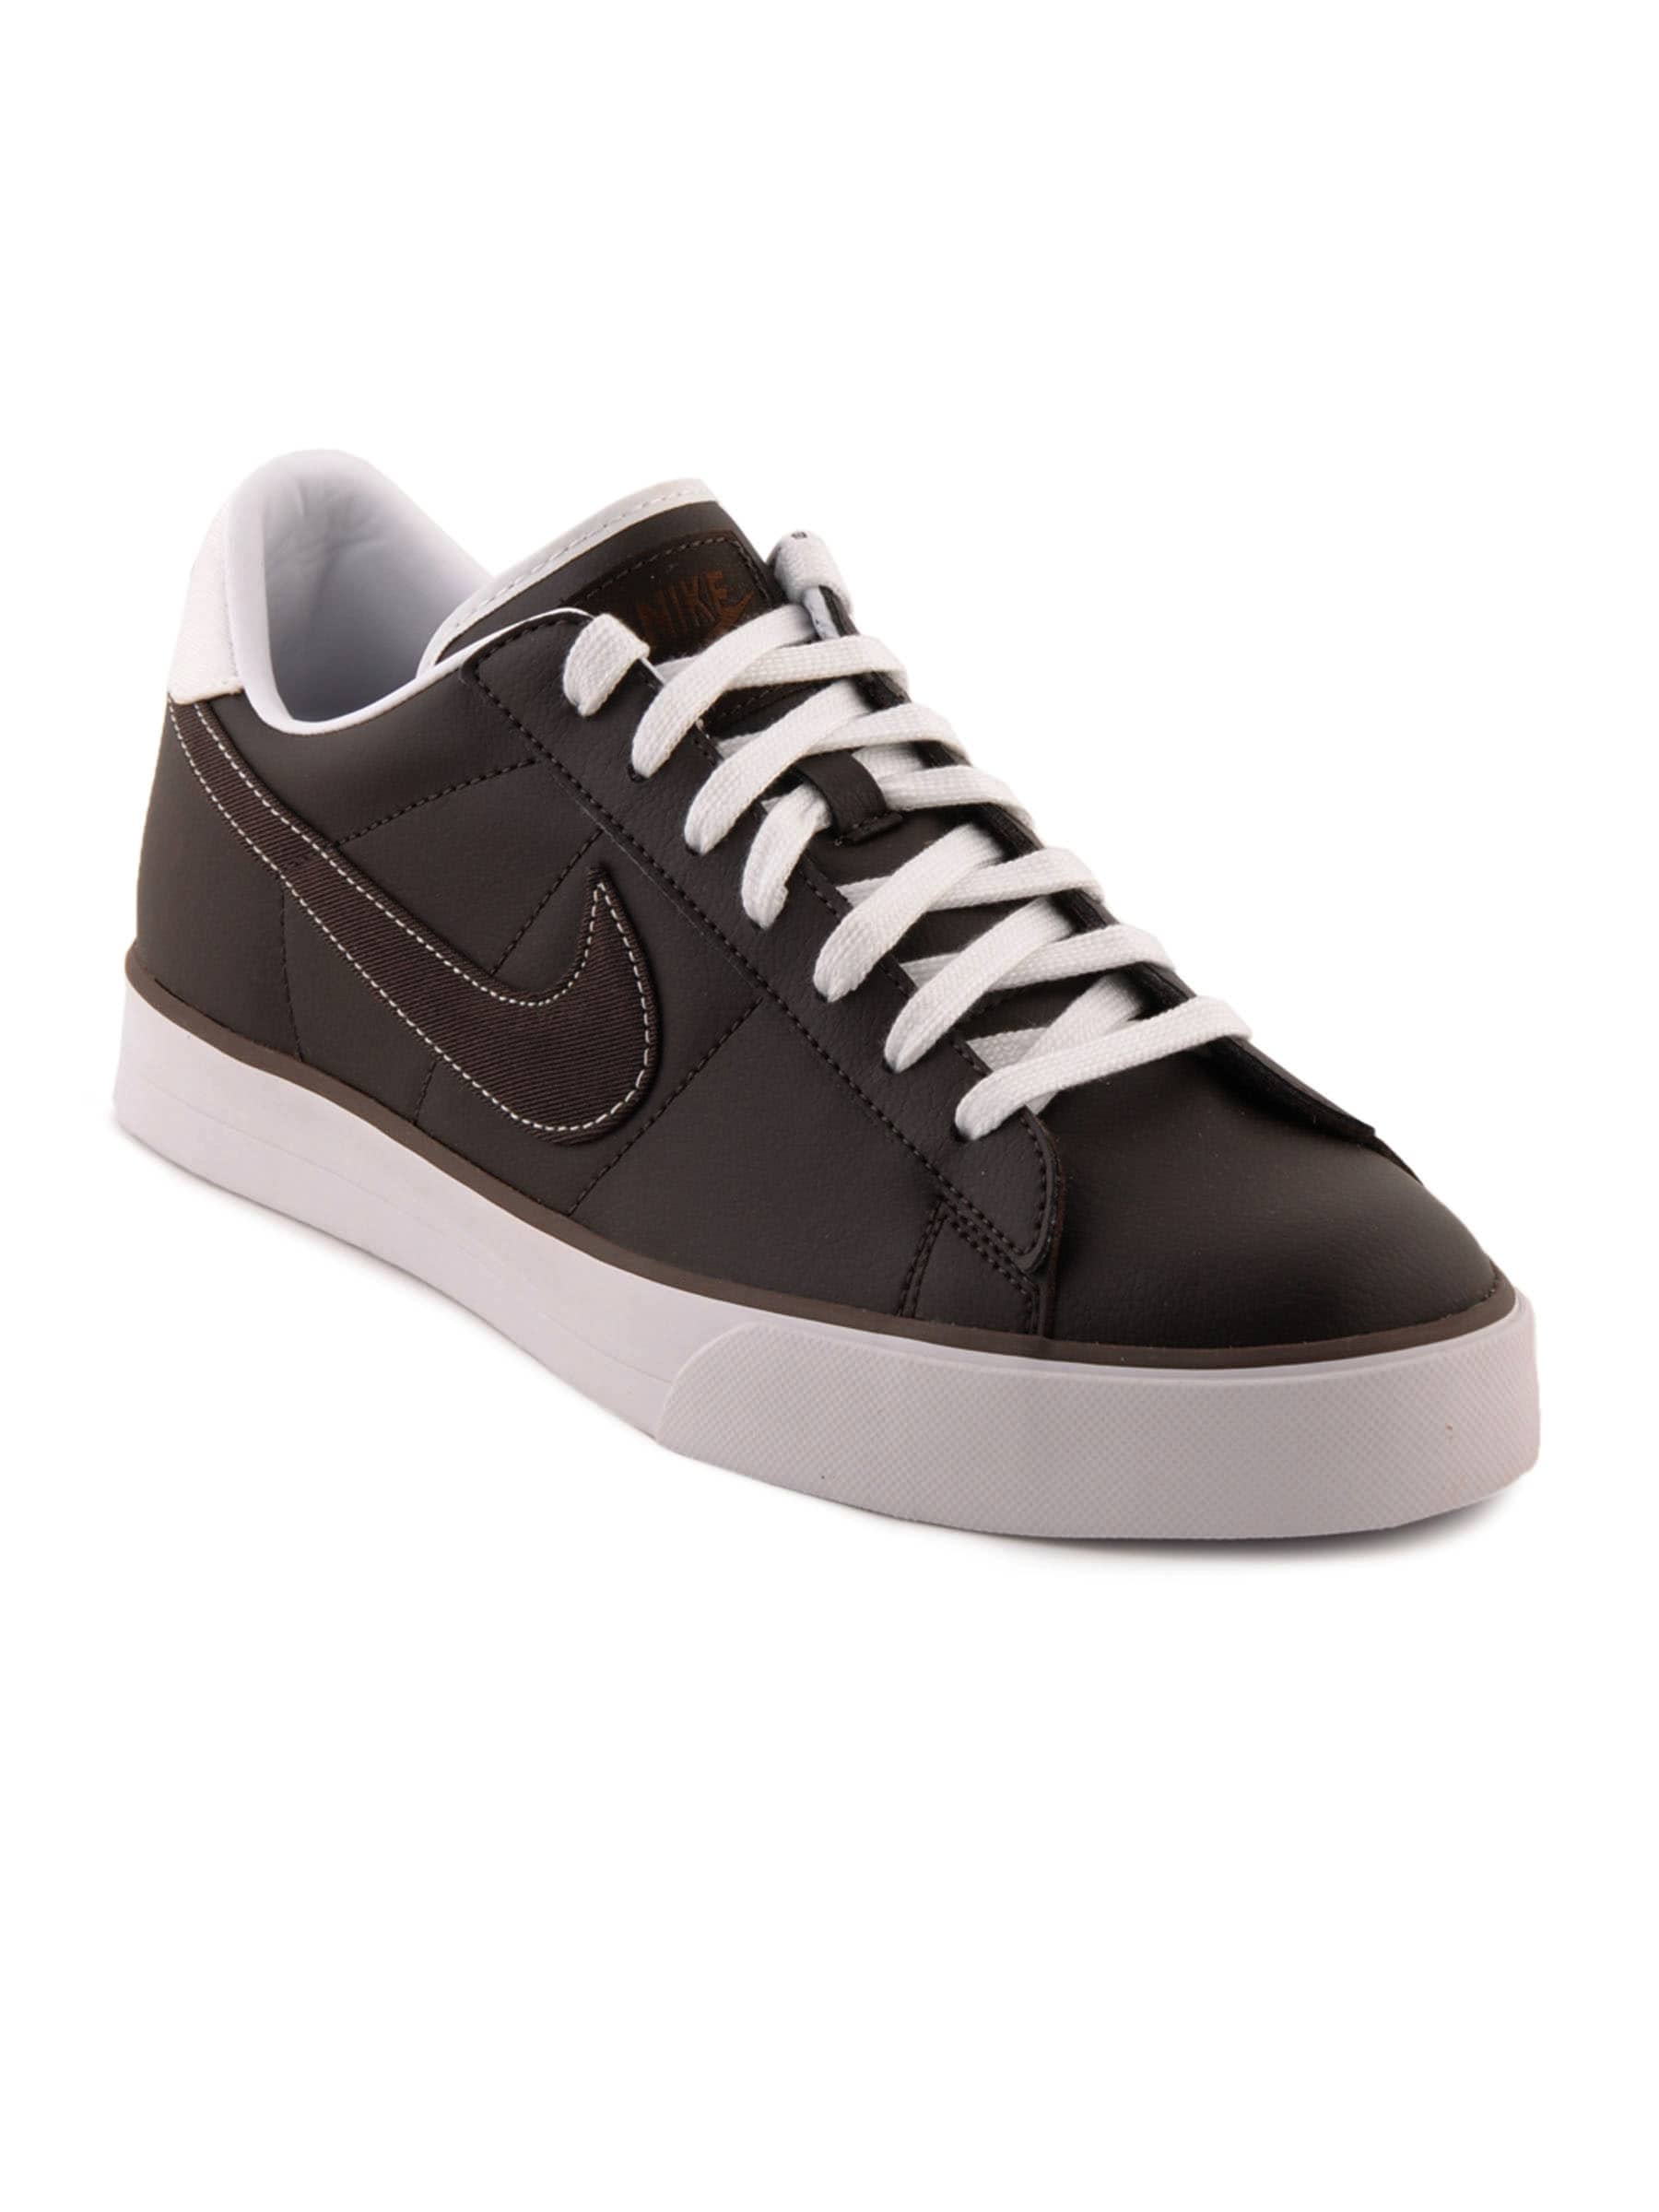 Nike Men Sweet Classic Leather Brown Casual Shoes